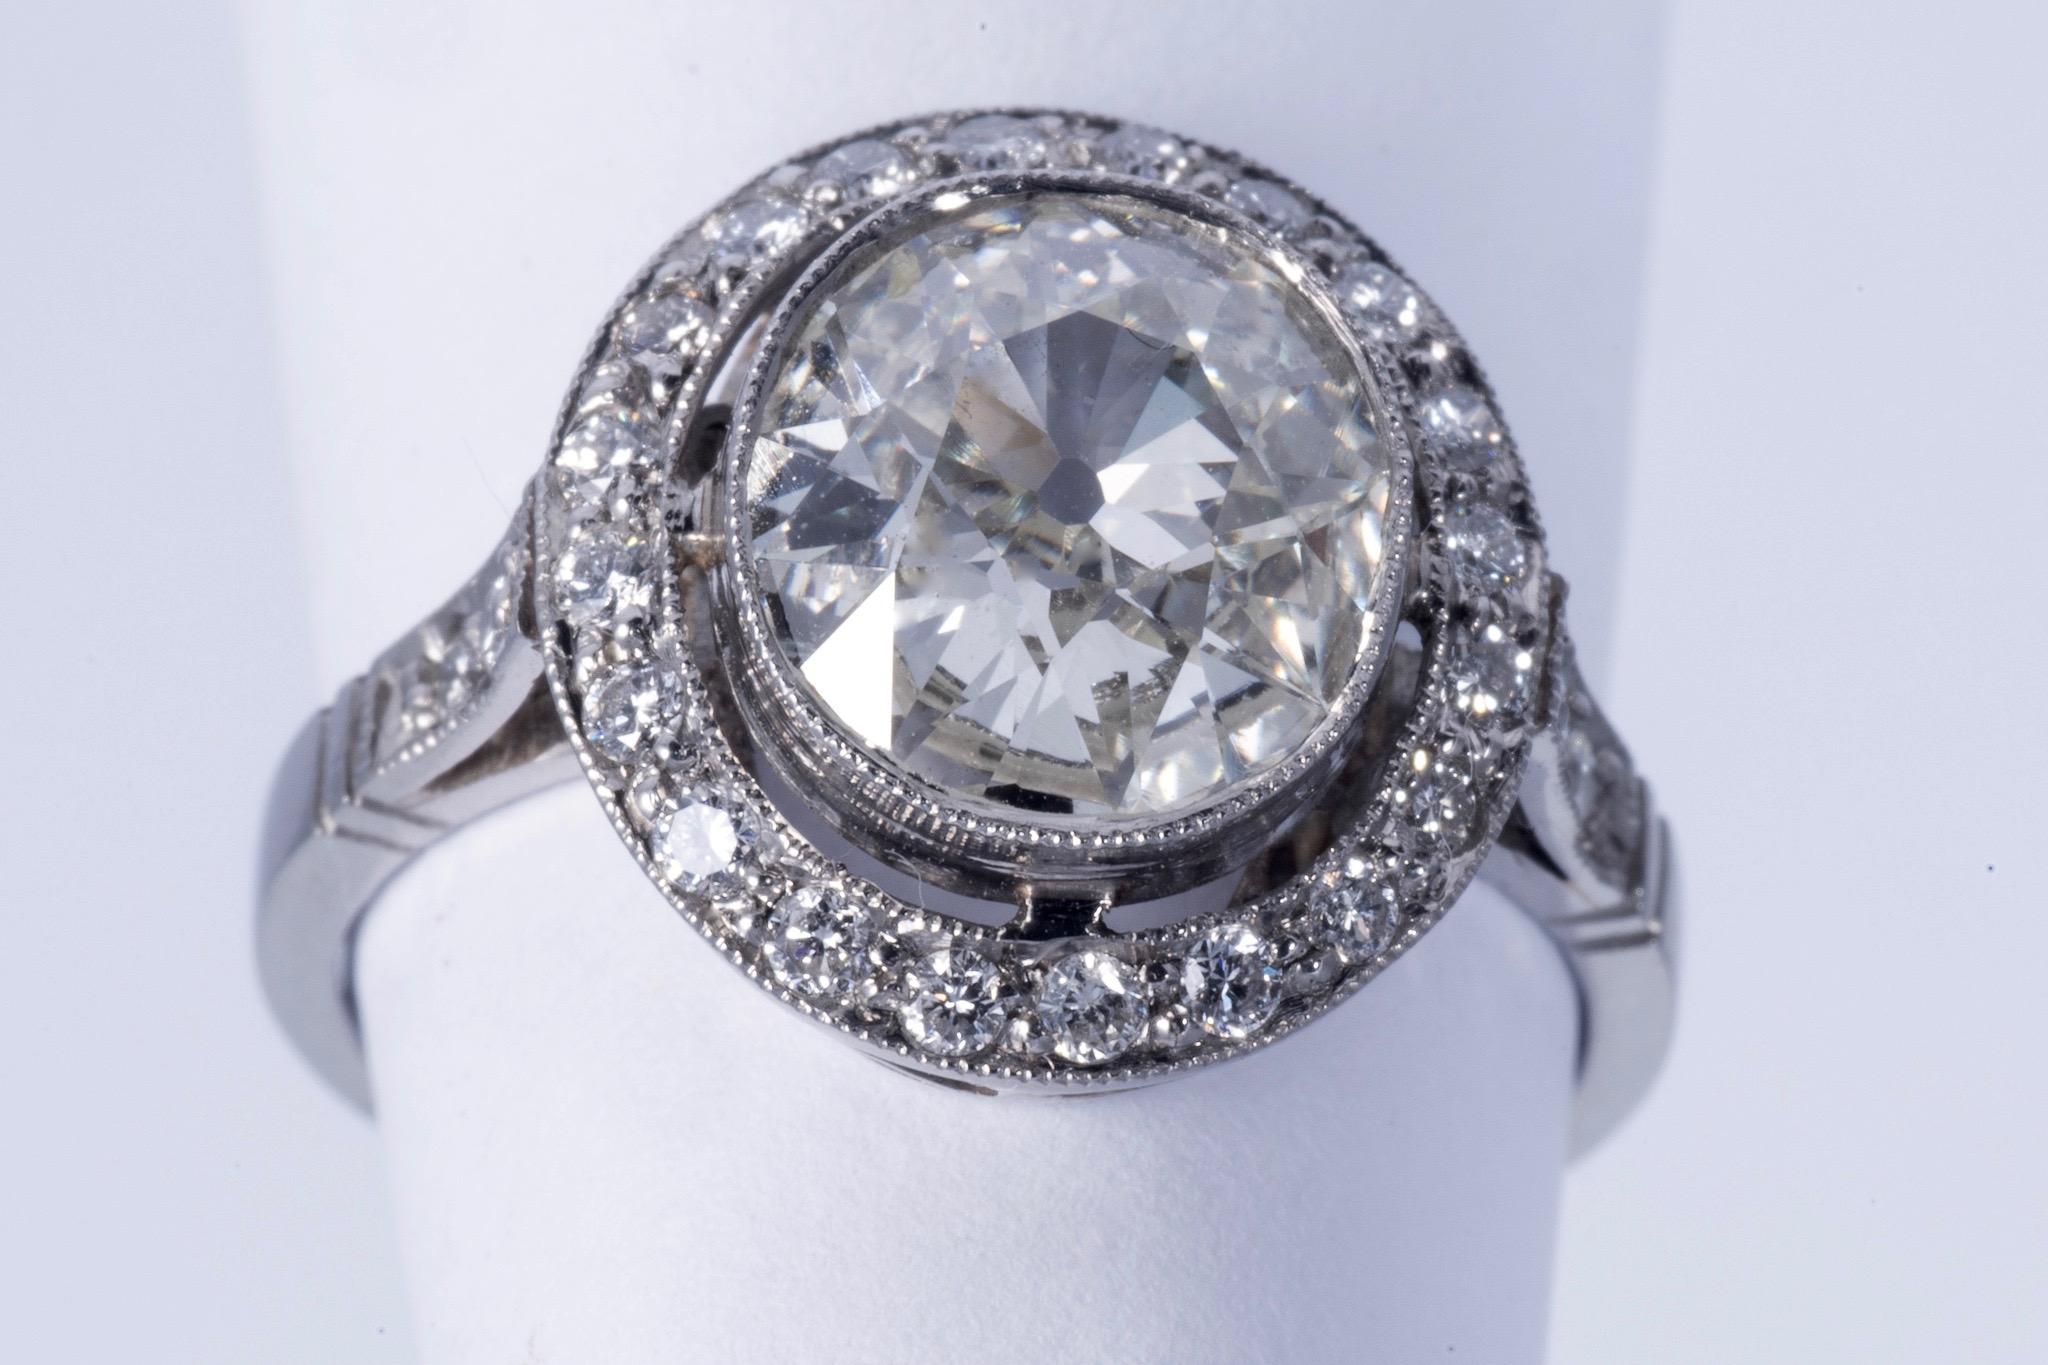 Fabulous European cushion cut diamond. The diamond weighs approx. 2.00cts and has J-K color and SI1 clarity. There is a halo with approx. 20 round cut diamonds and there are 2 round cut diamonds on either side of the shank. All together, the side